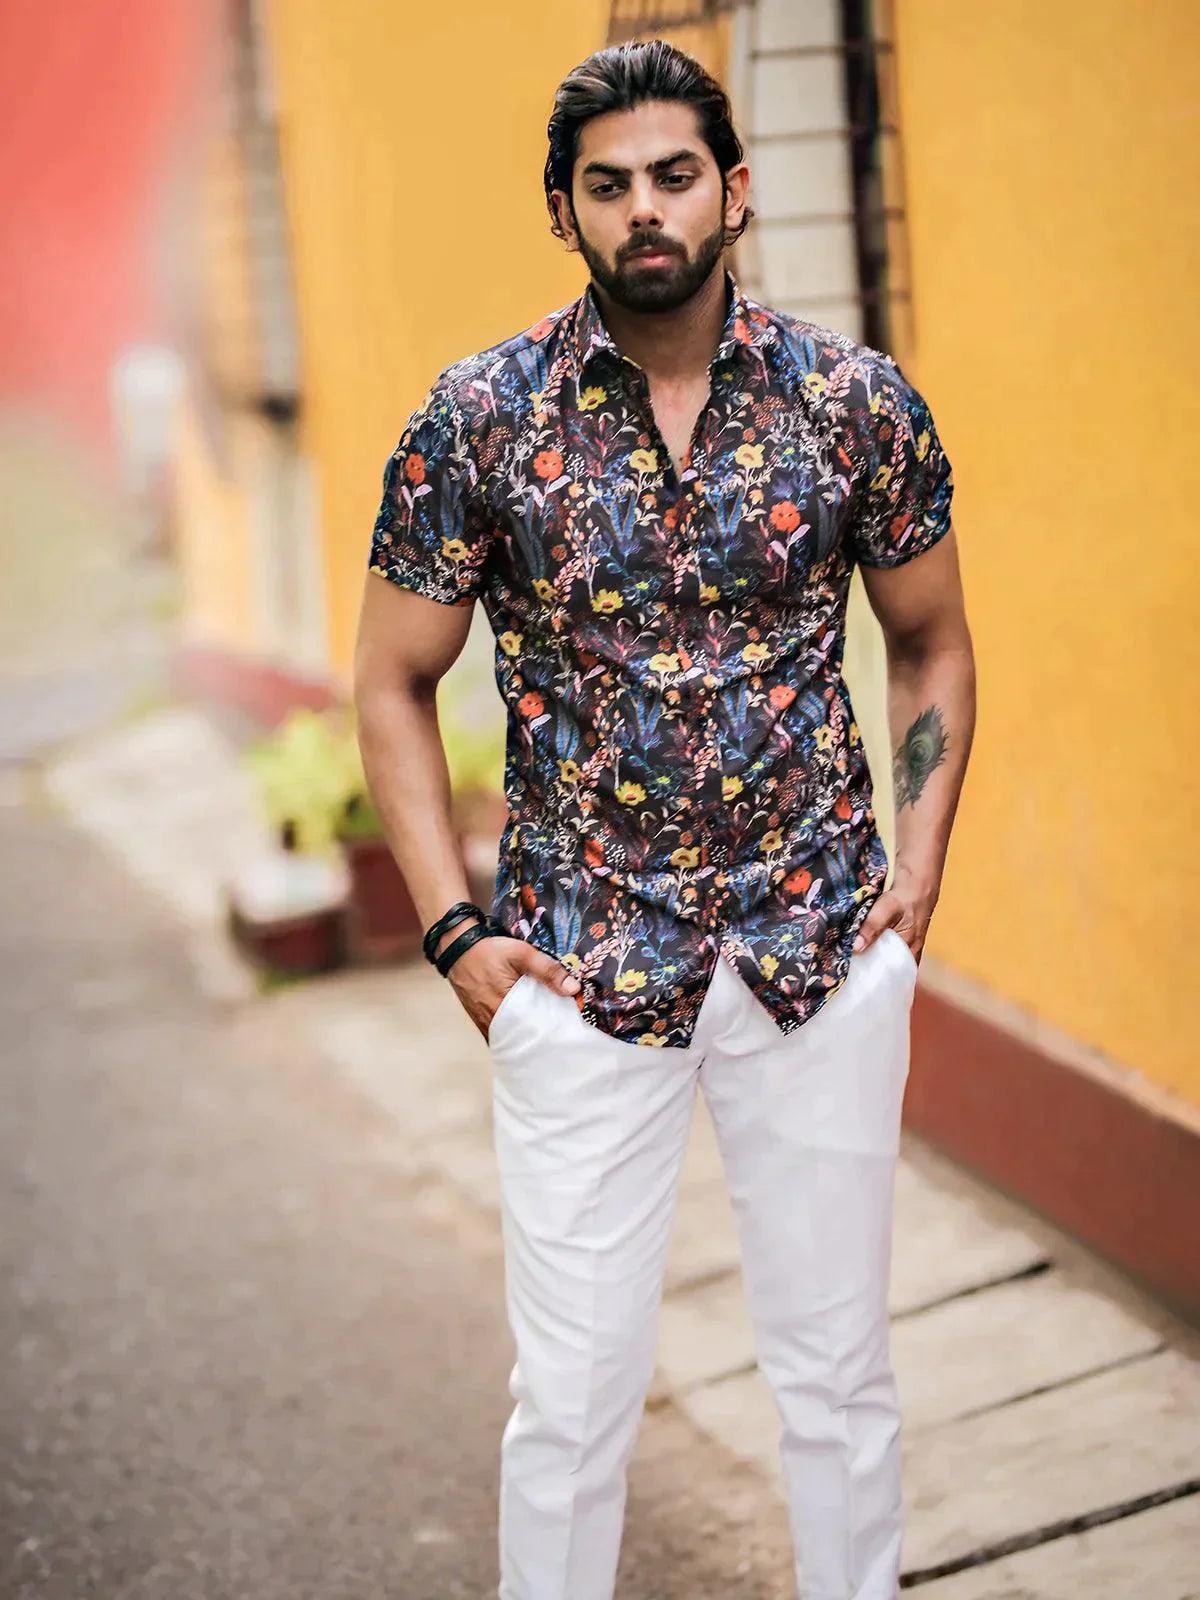 10 Floral Shirts To Up Your Next Summer Style Look | Floral shirt outfit,  Mens casual outfits summer, Men fashion casual shirts